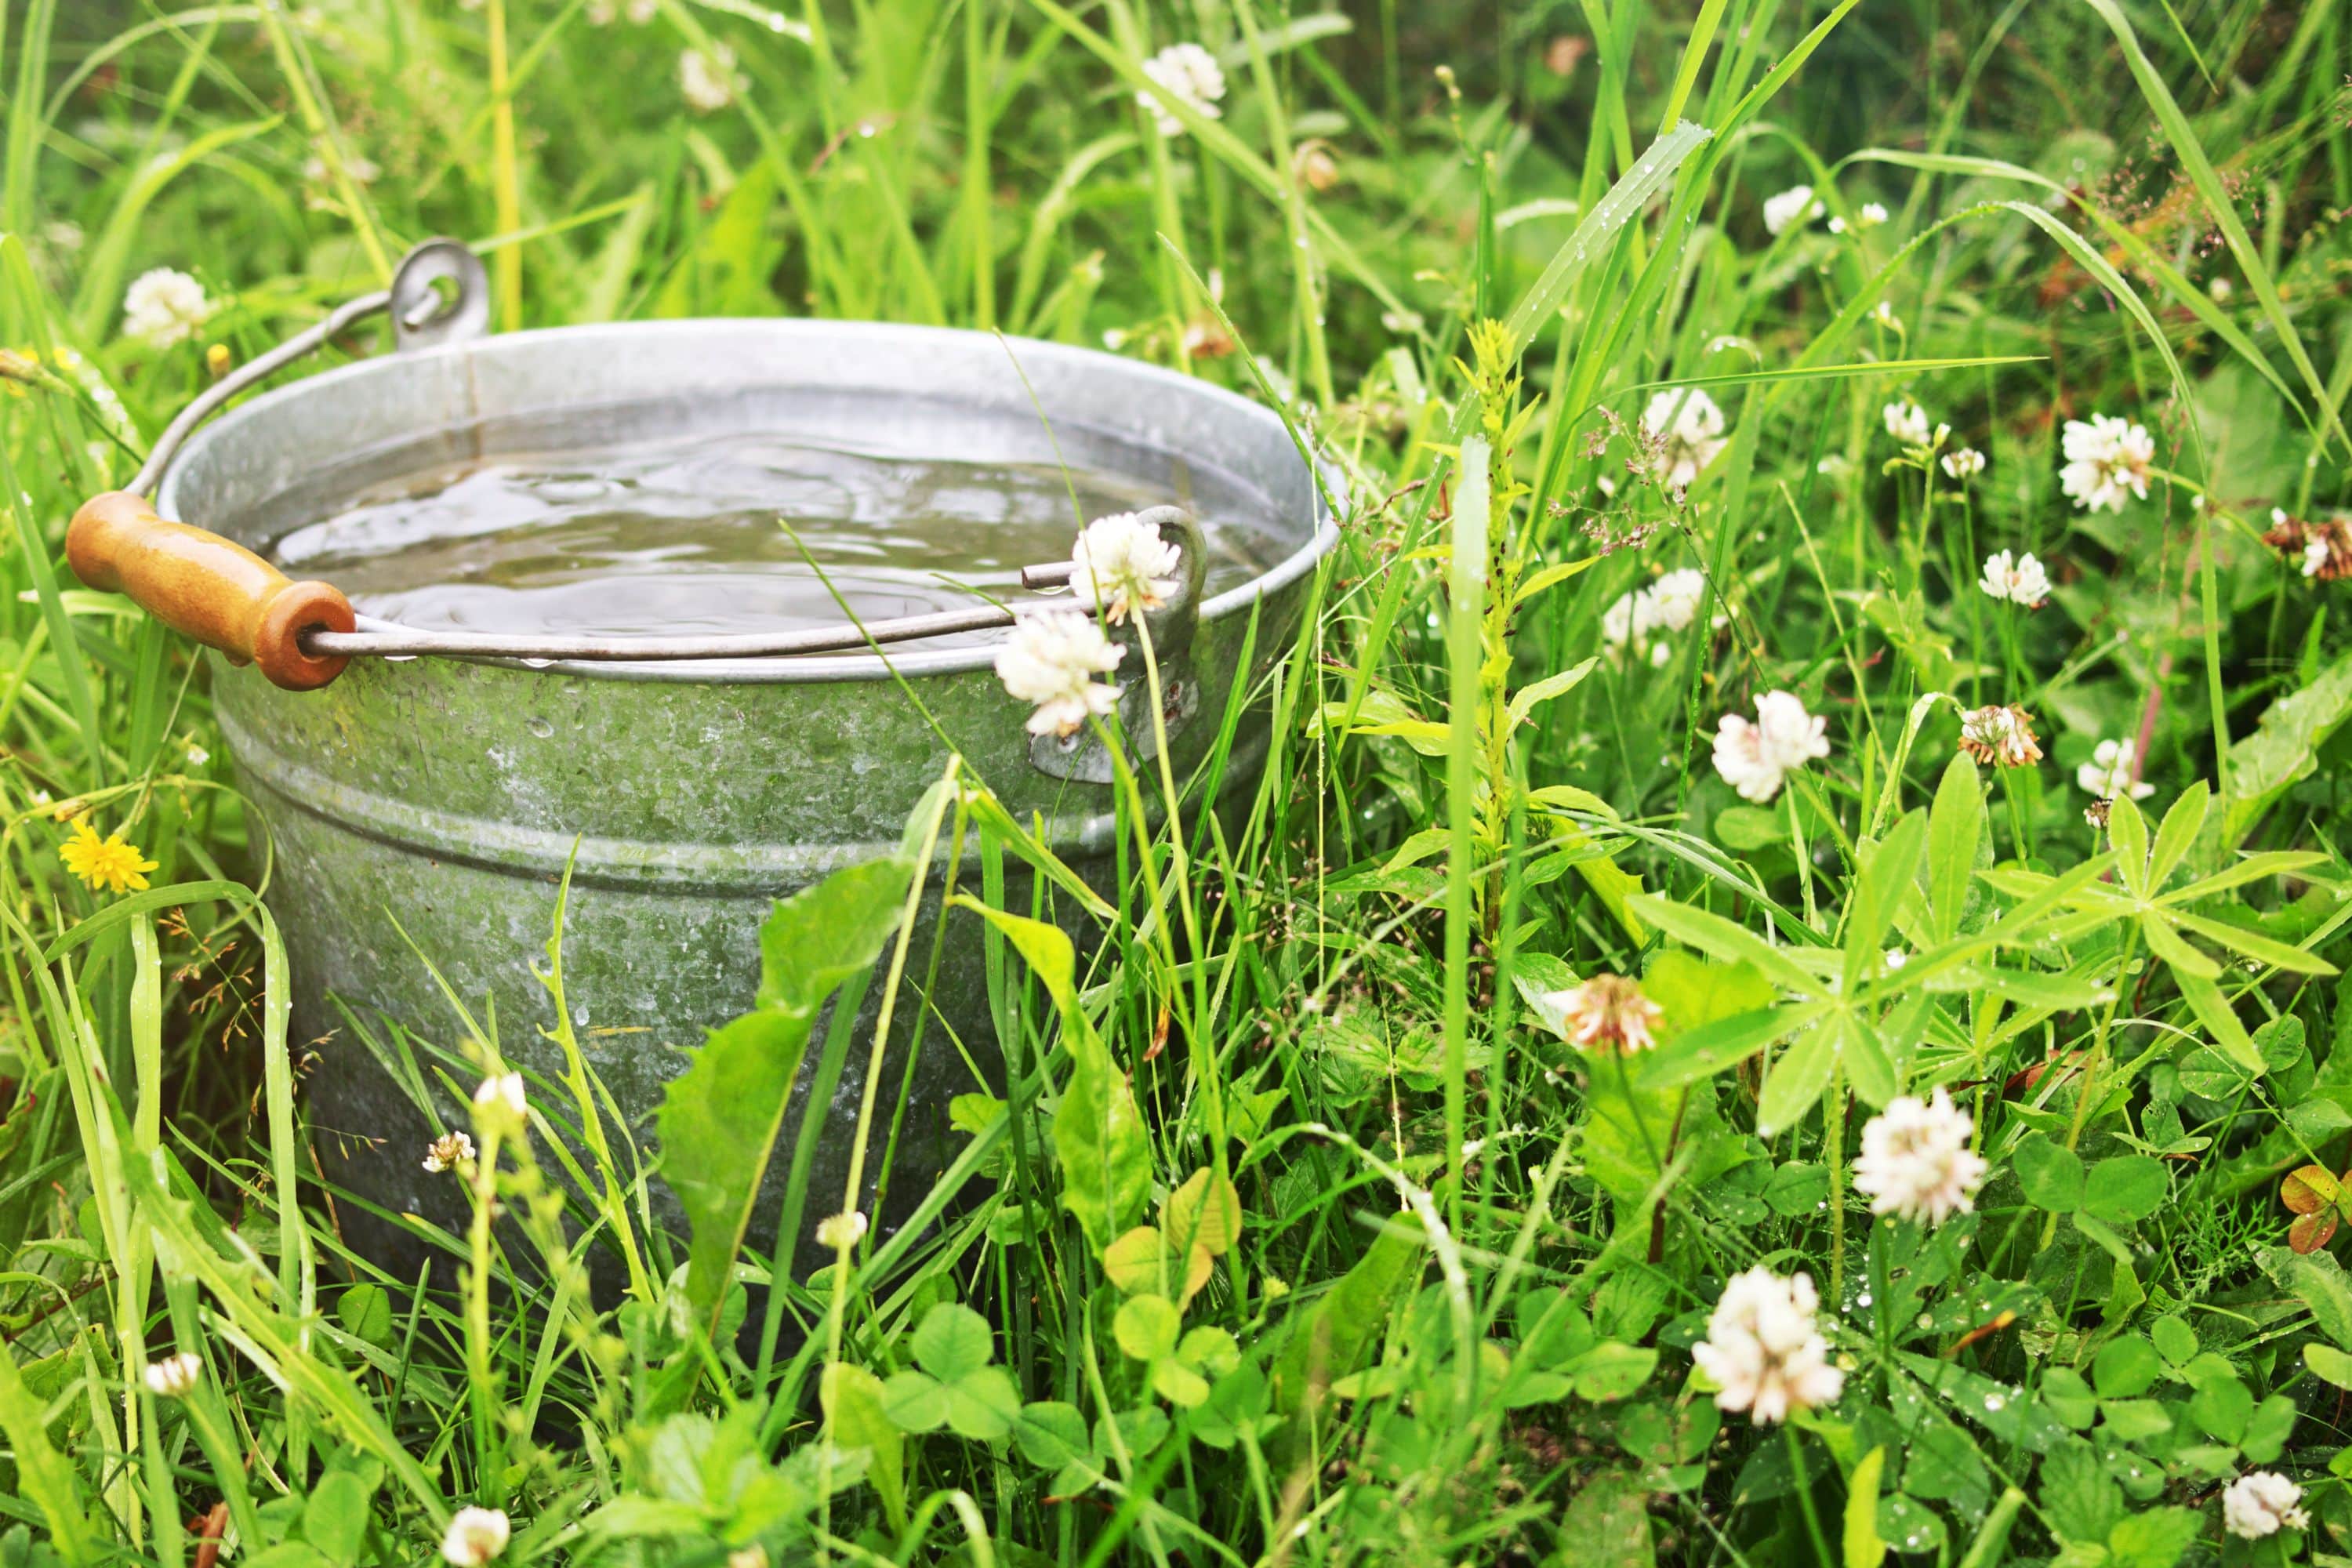 a bucket containing shower water to water plants